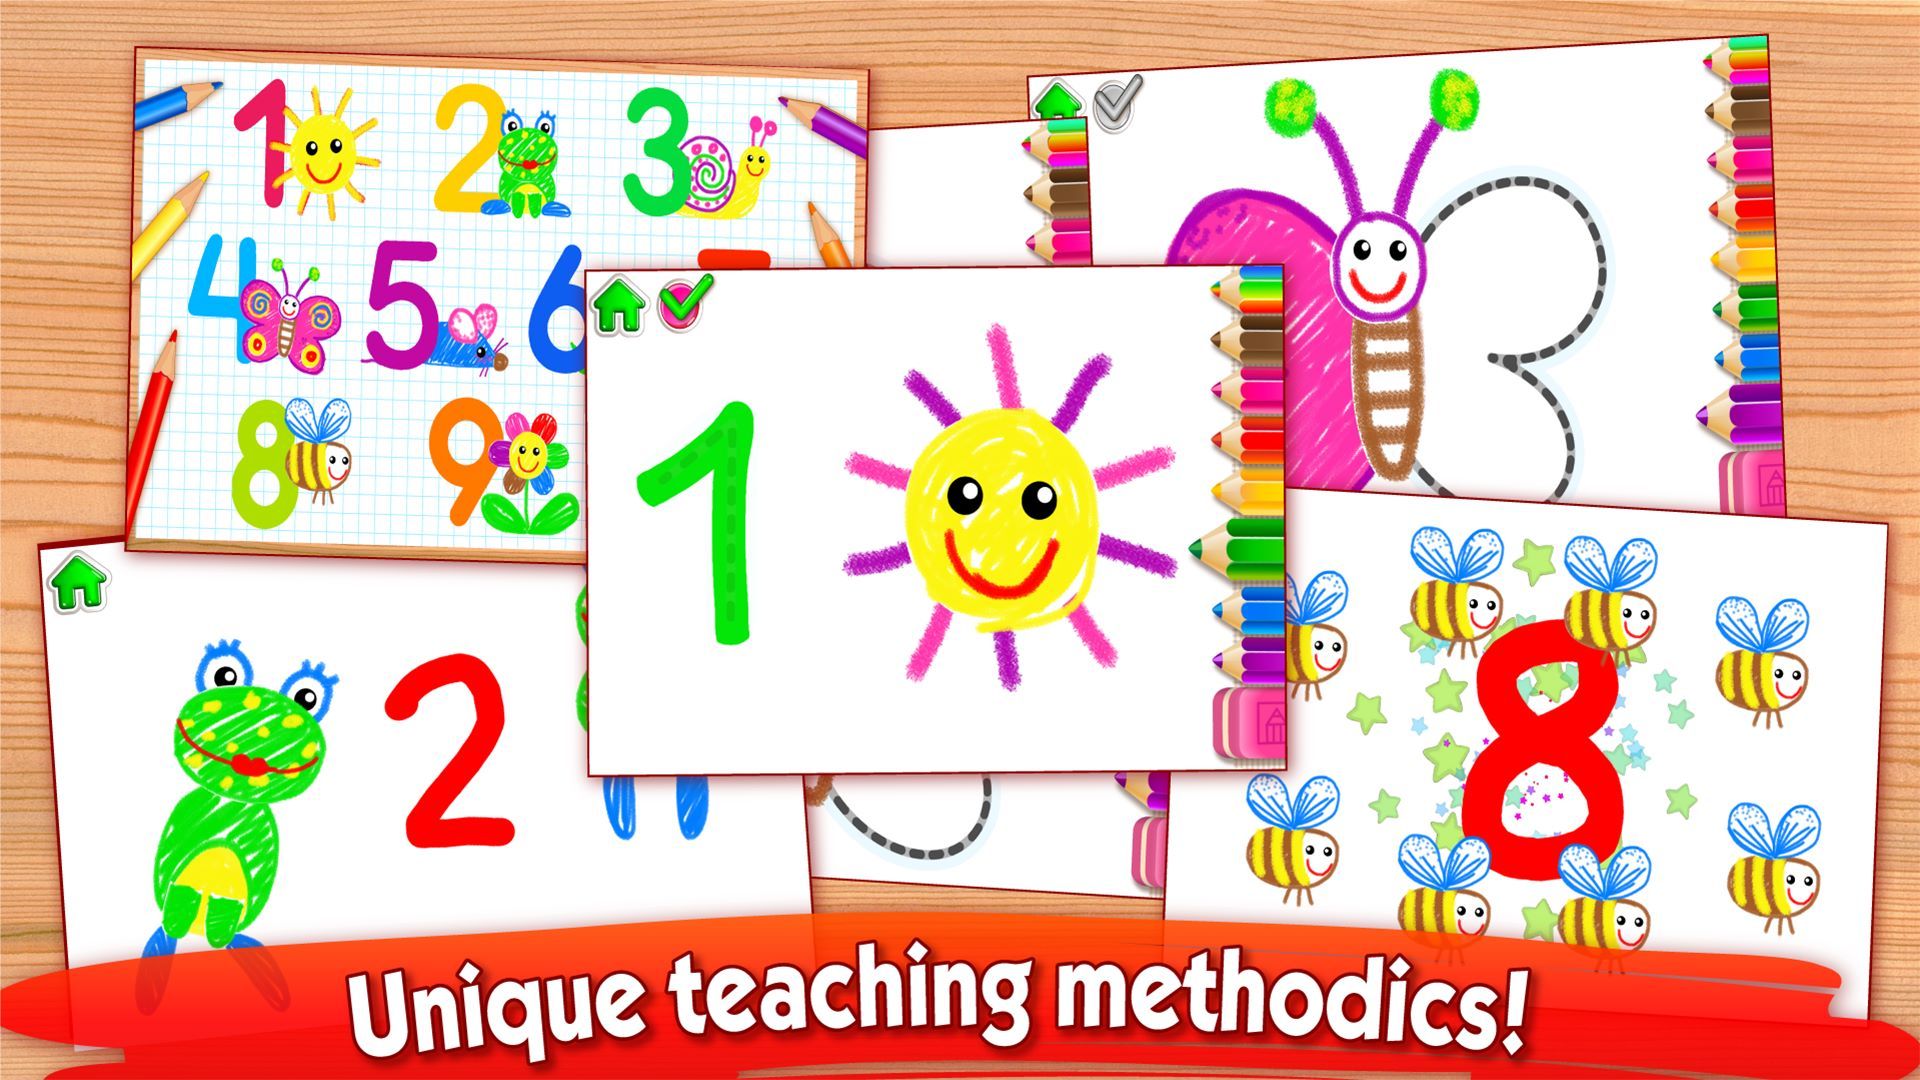 123 NUMBERS DRAWING FOR KIDS! Learn How to Draw Numbers for Kids in Kindergarten Learning Games for Preschoolers FREE! Coloring Games for Girls and Boys & Counting for Toddlers in Educational Childrens Apps and Baby Painting Game 2 3 4 5 Year Olds